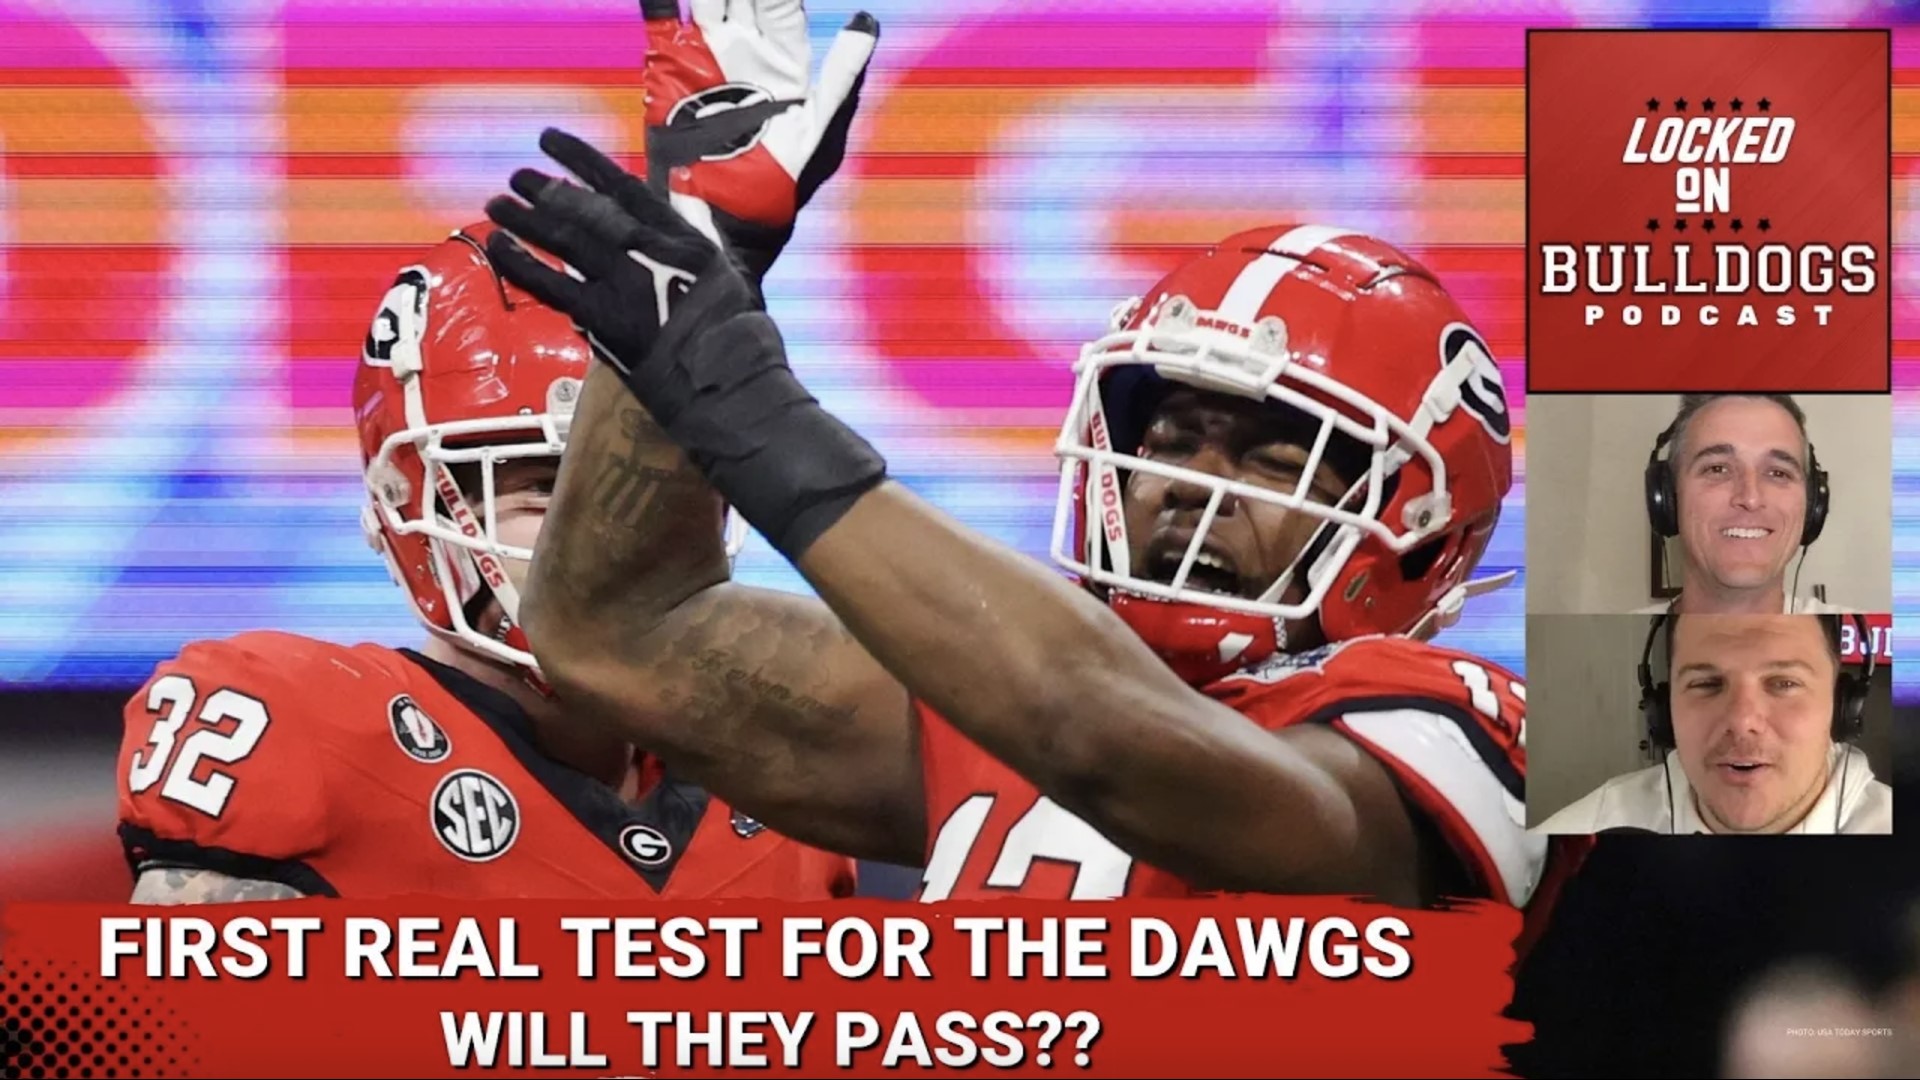 GEORGIA FOOTBALL: IF USCjr keeps it close against this UGA team it will be because...